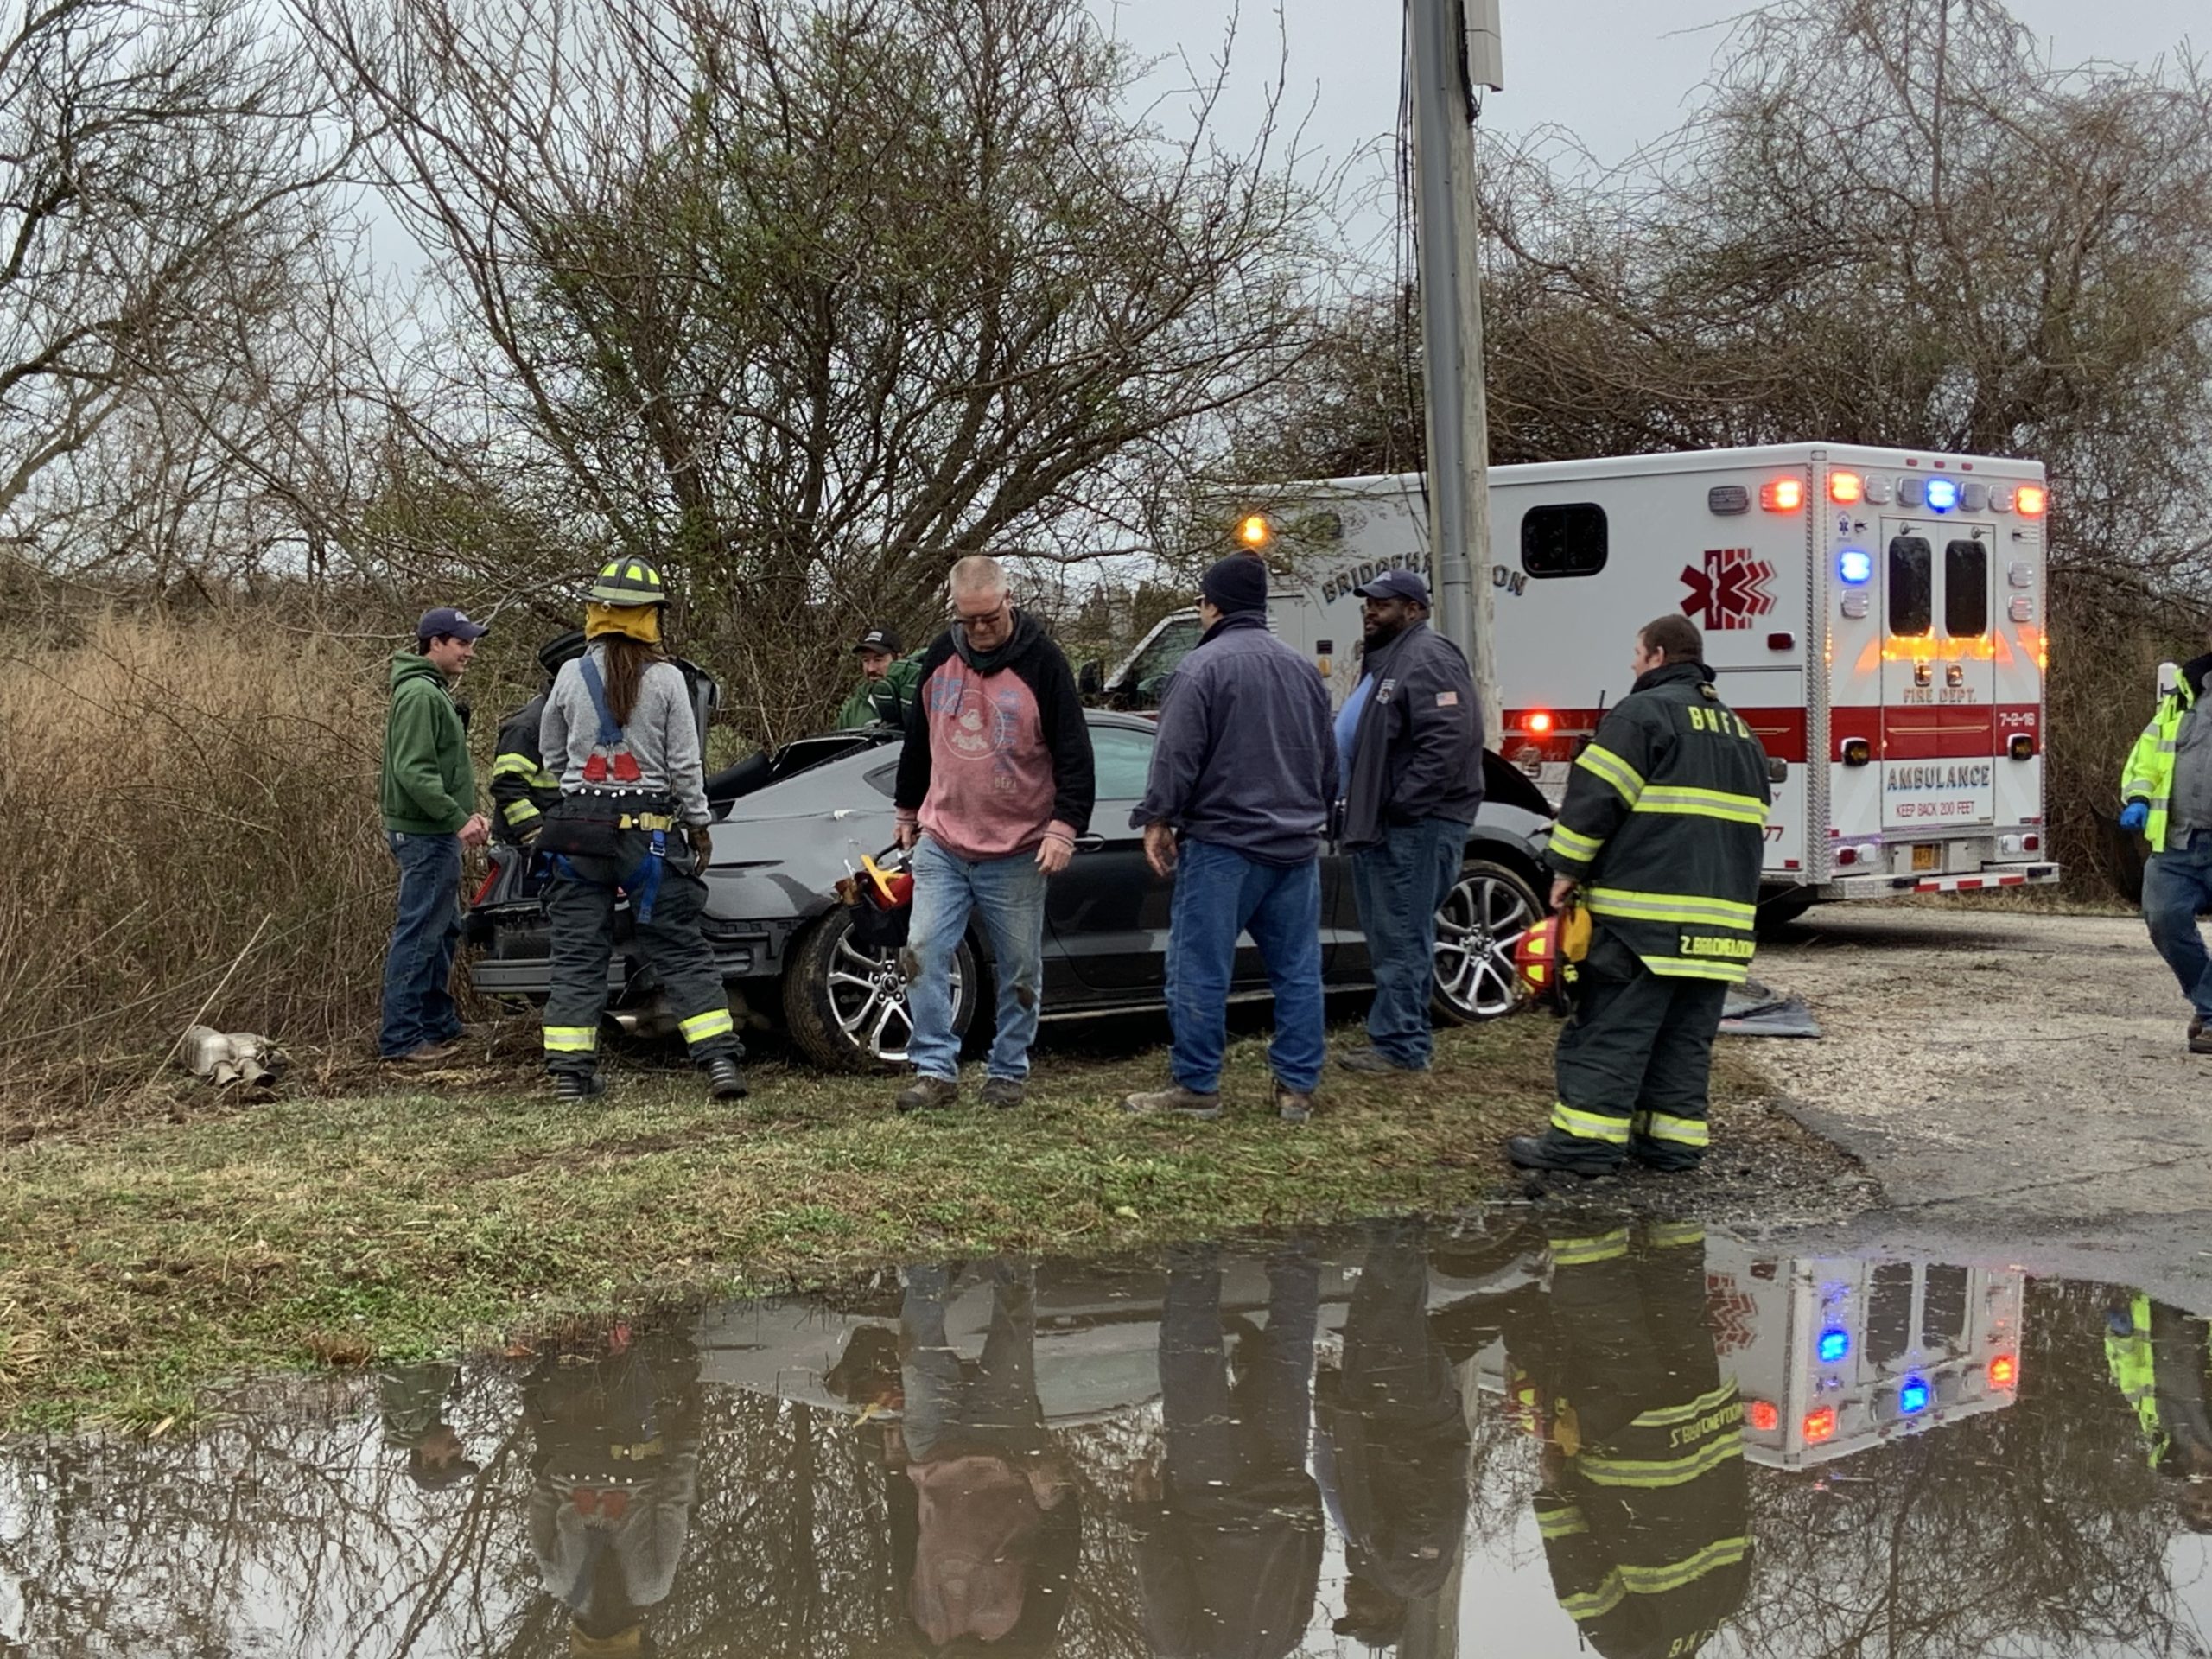 Bridgehampton firefighters and EMS personnel were at the scene of a single-car accident on Highland Terrace in Bridgehampton Thursday, March 19, at about 3:3:30 p.m. STEPHEN J. KOTZ